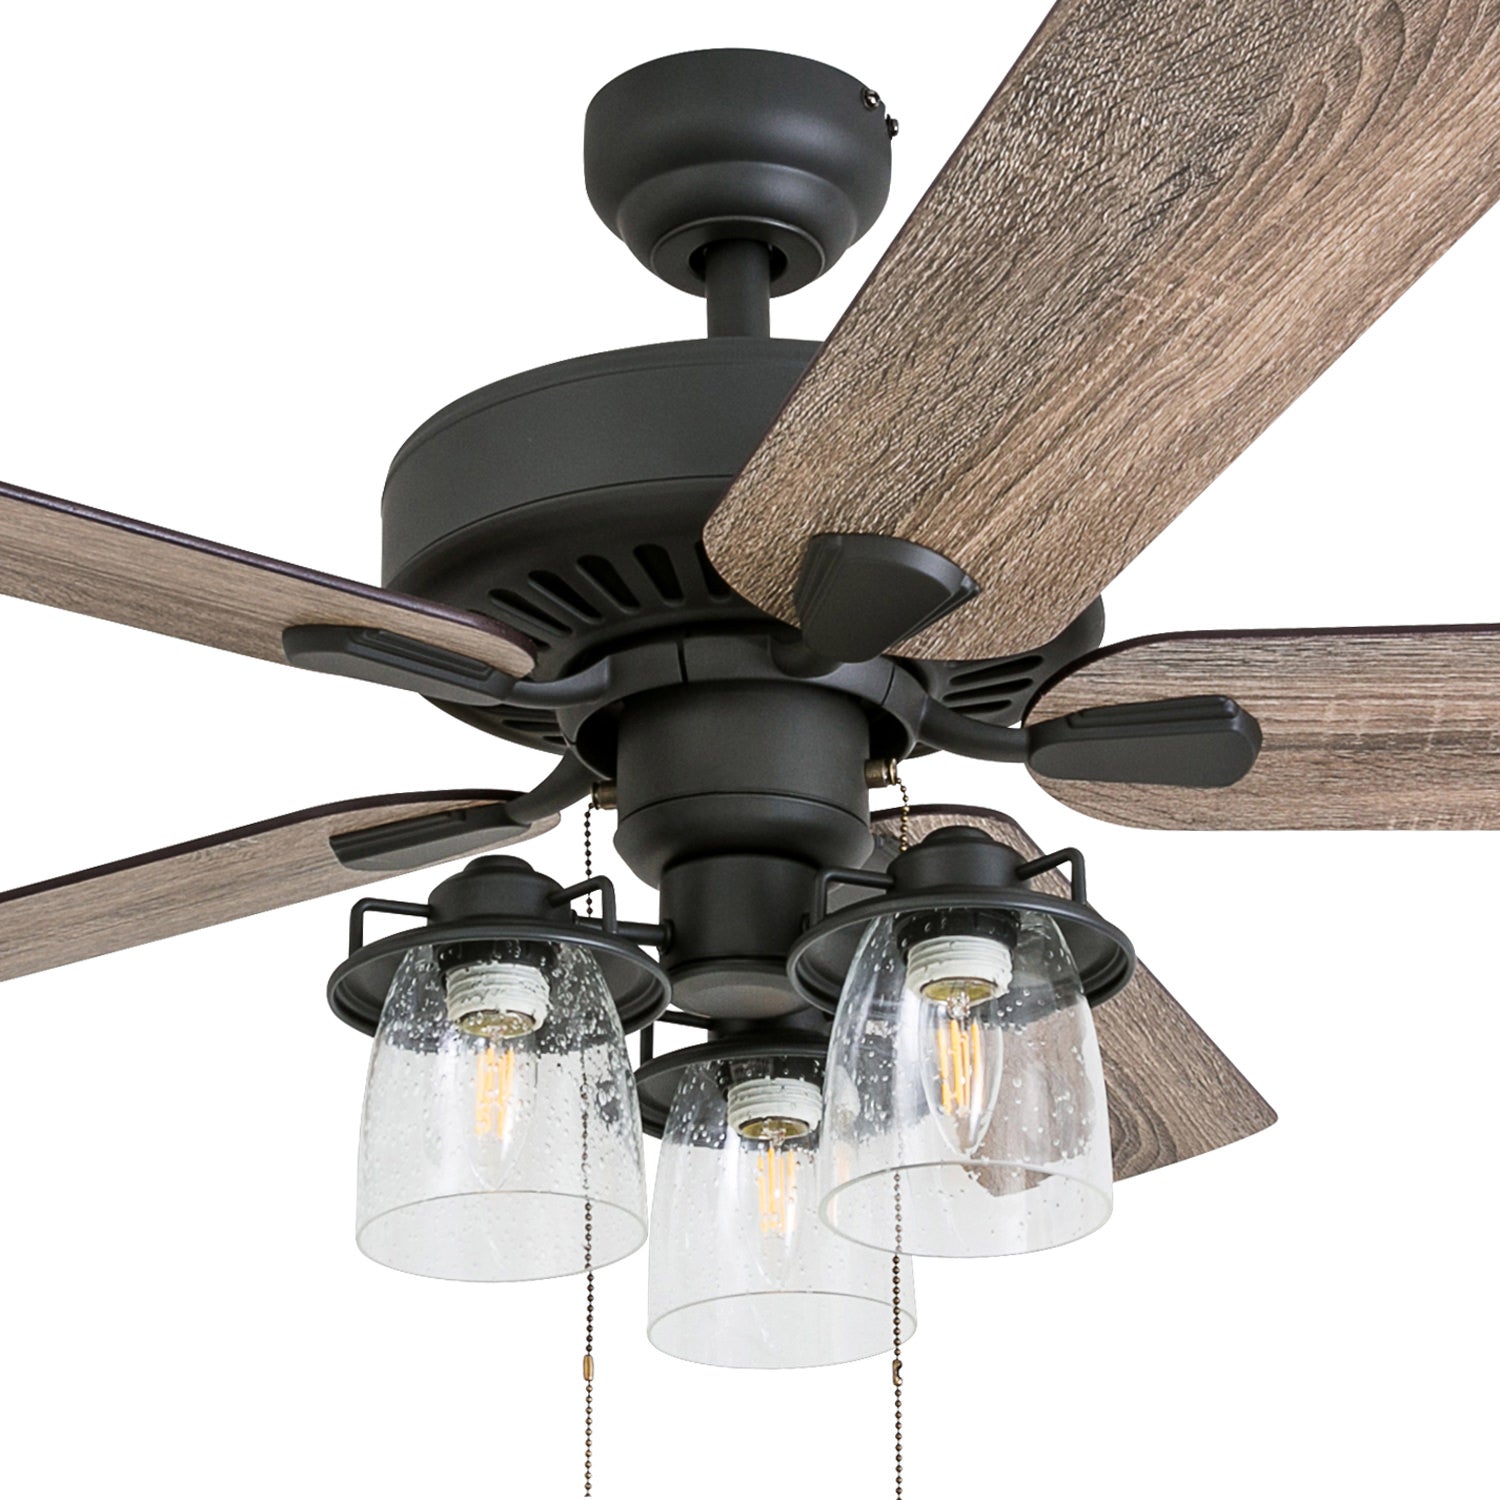 52 Inch Briarcrest, Bronze, Remote Control, Ceiling Fan by Prominence Home